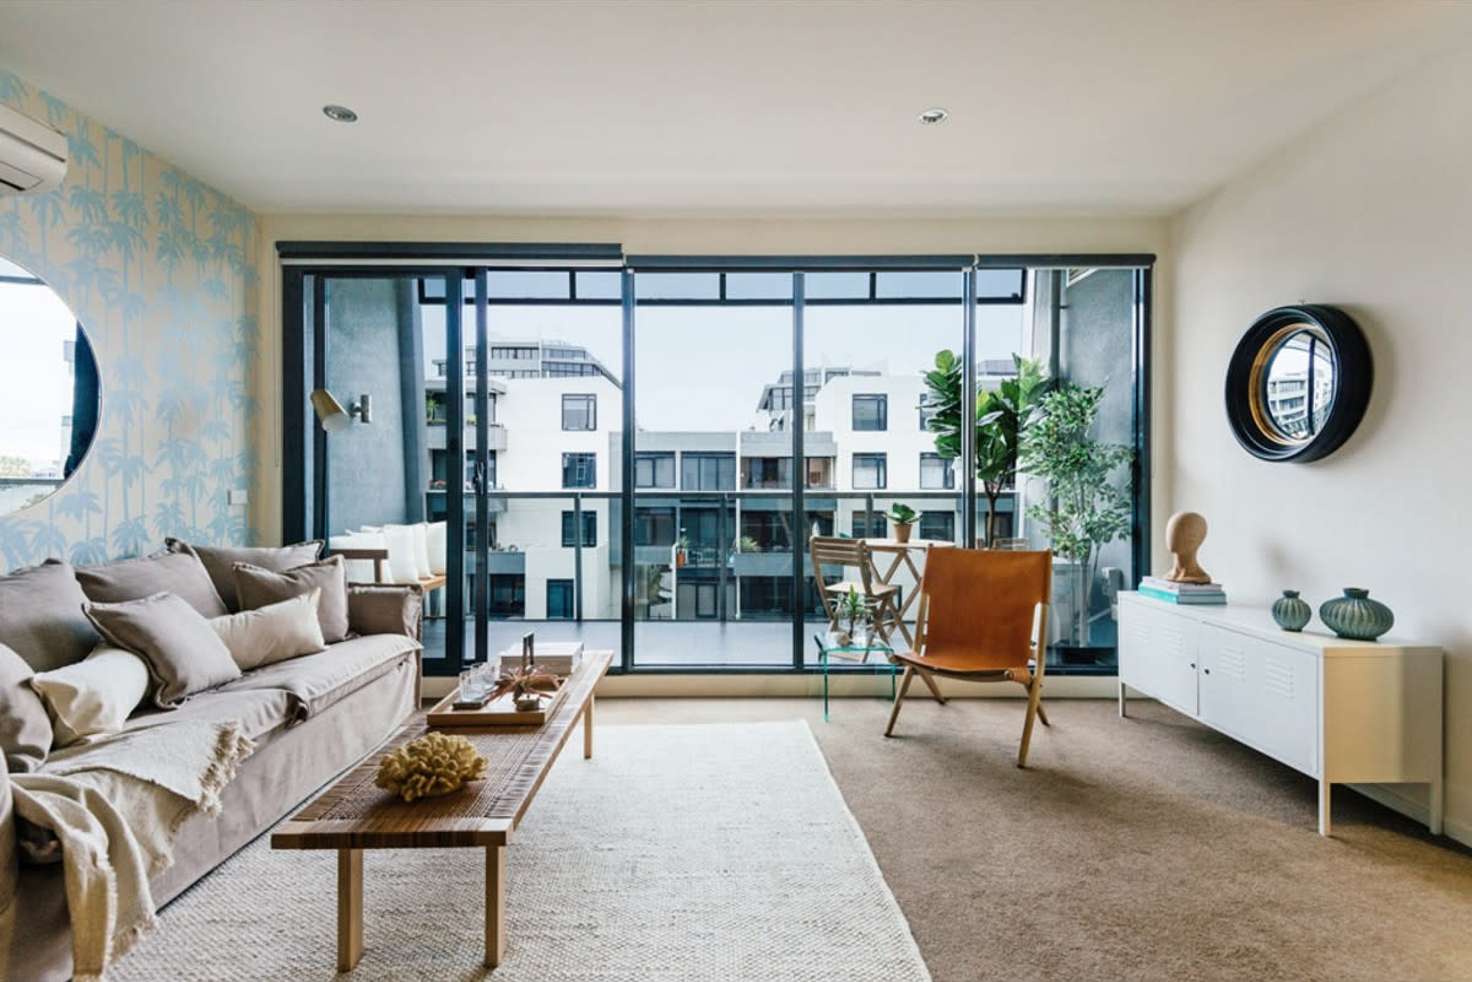 Main view of Homely apartment listing, 506/216 Rouse Street, Port Melbourne VIC 3207